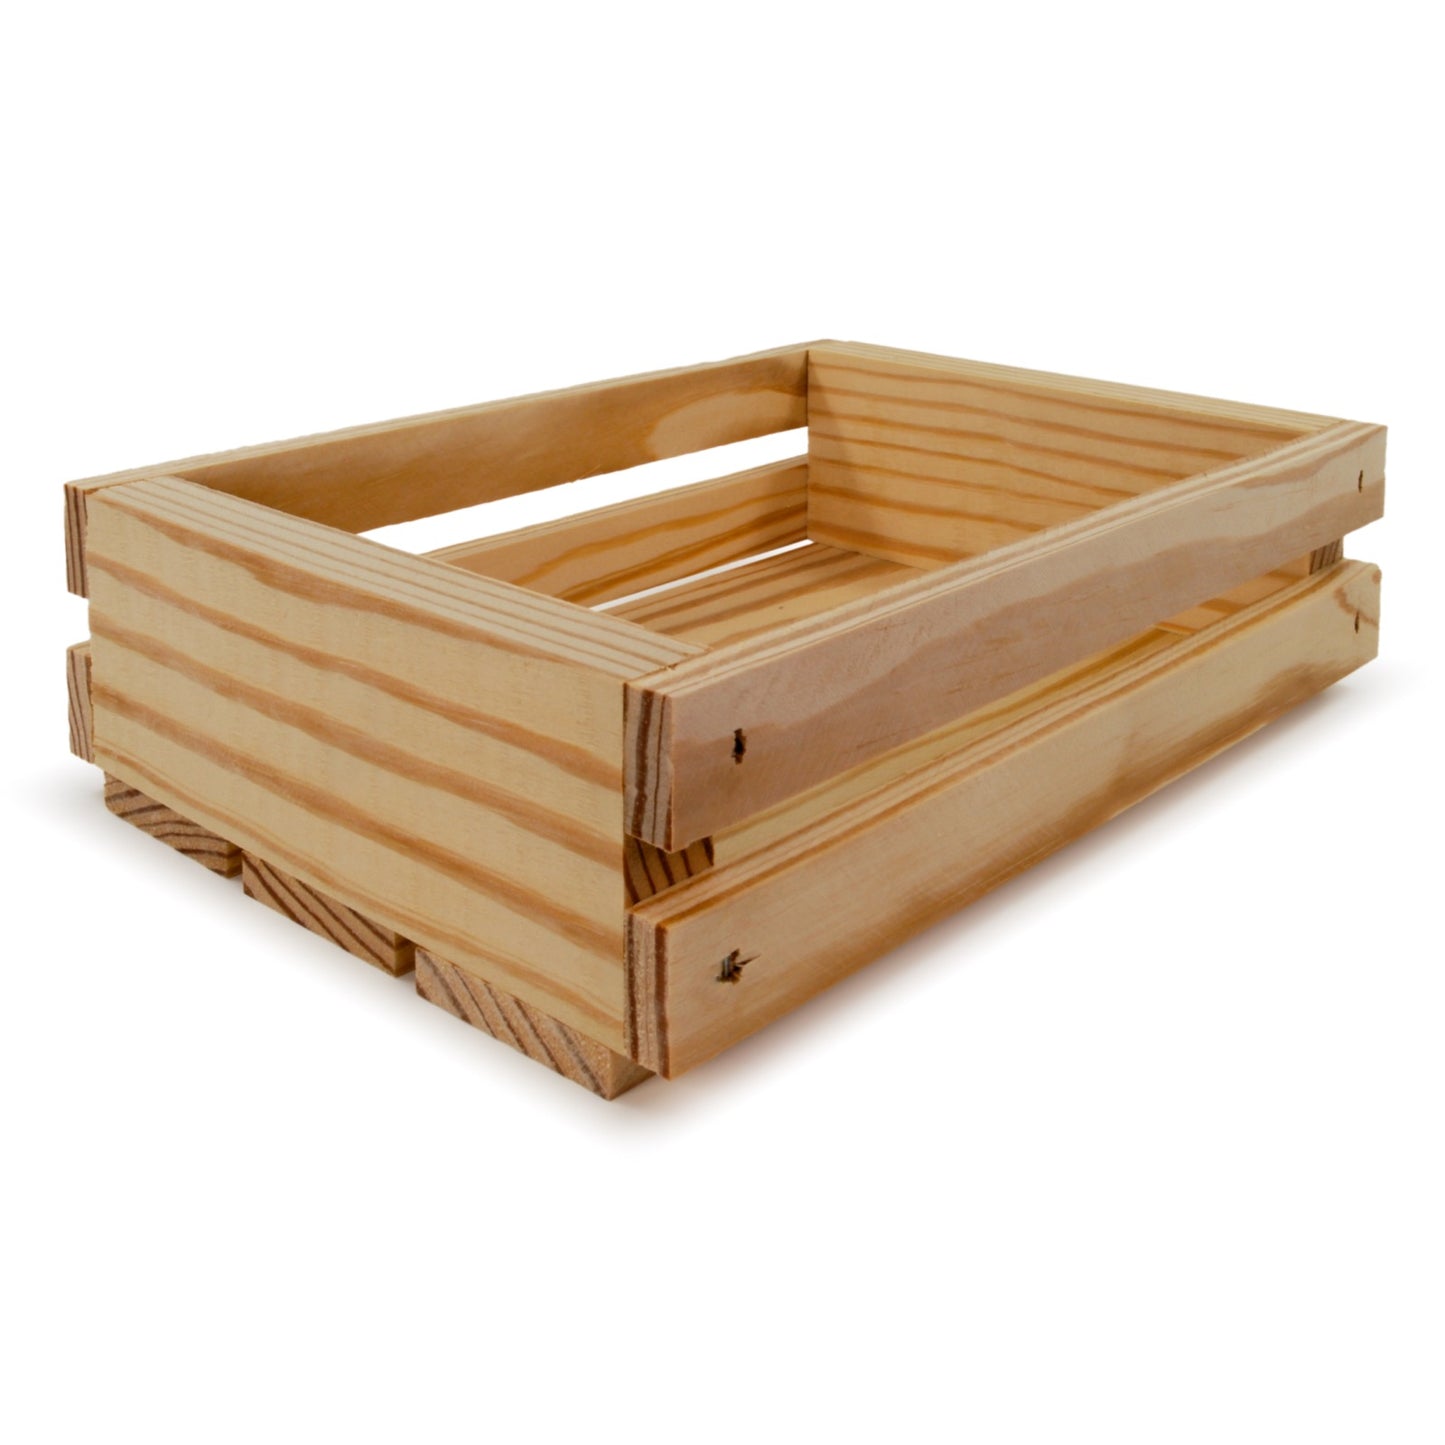 Small wooden crates 8x6x2.5, 6-SS-8-6-2.5-NX-NW-NL, 12-SS-8-6-2.5-NX-NW-NL, 24-SS-8-6-2.5-NX-NW-NL, 48-SS-8-6-2.5-NX-NW-NL, 96-SS-8-6-2.5-NX-NW-NL